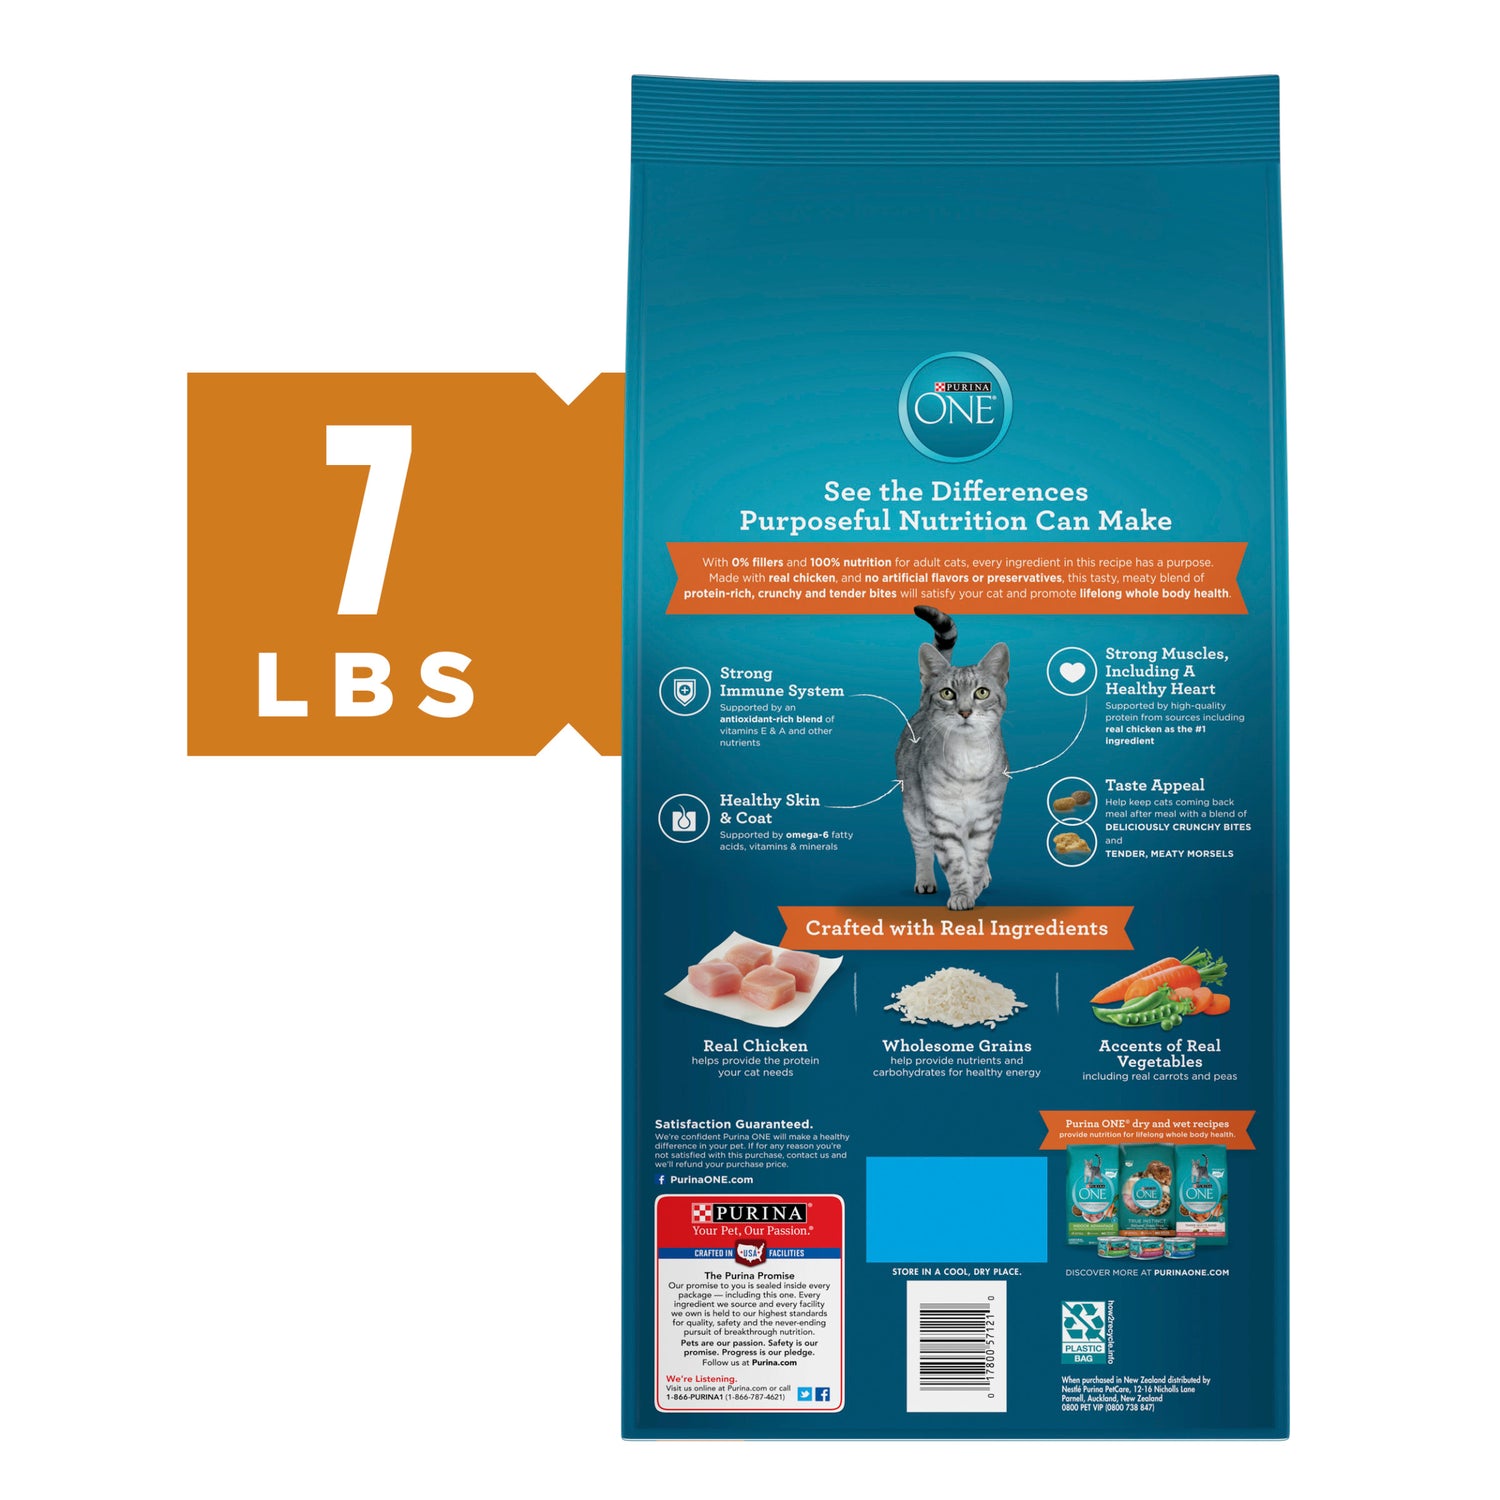 Purina ONE Natural Dry Cat Food, Tender Selects Blend with Real Chicken, 7 Lb. Bag